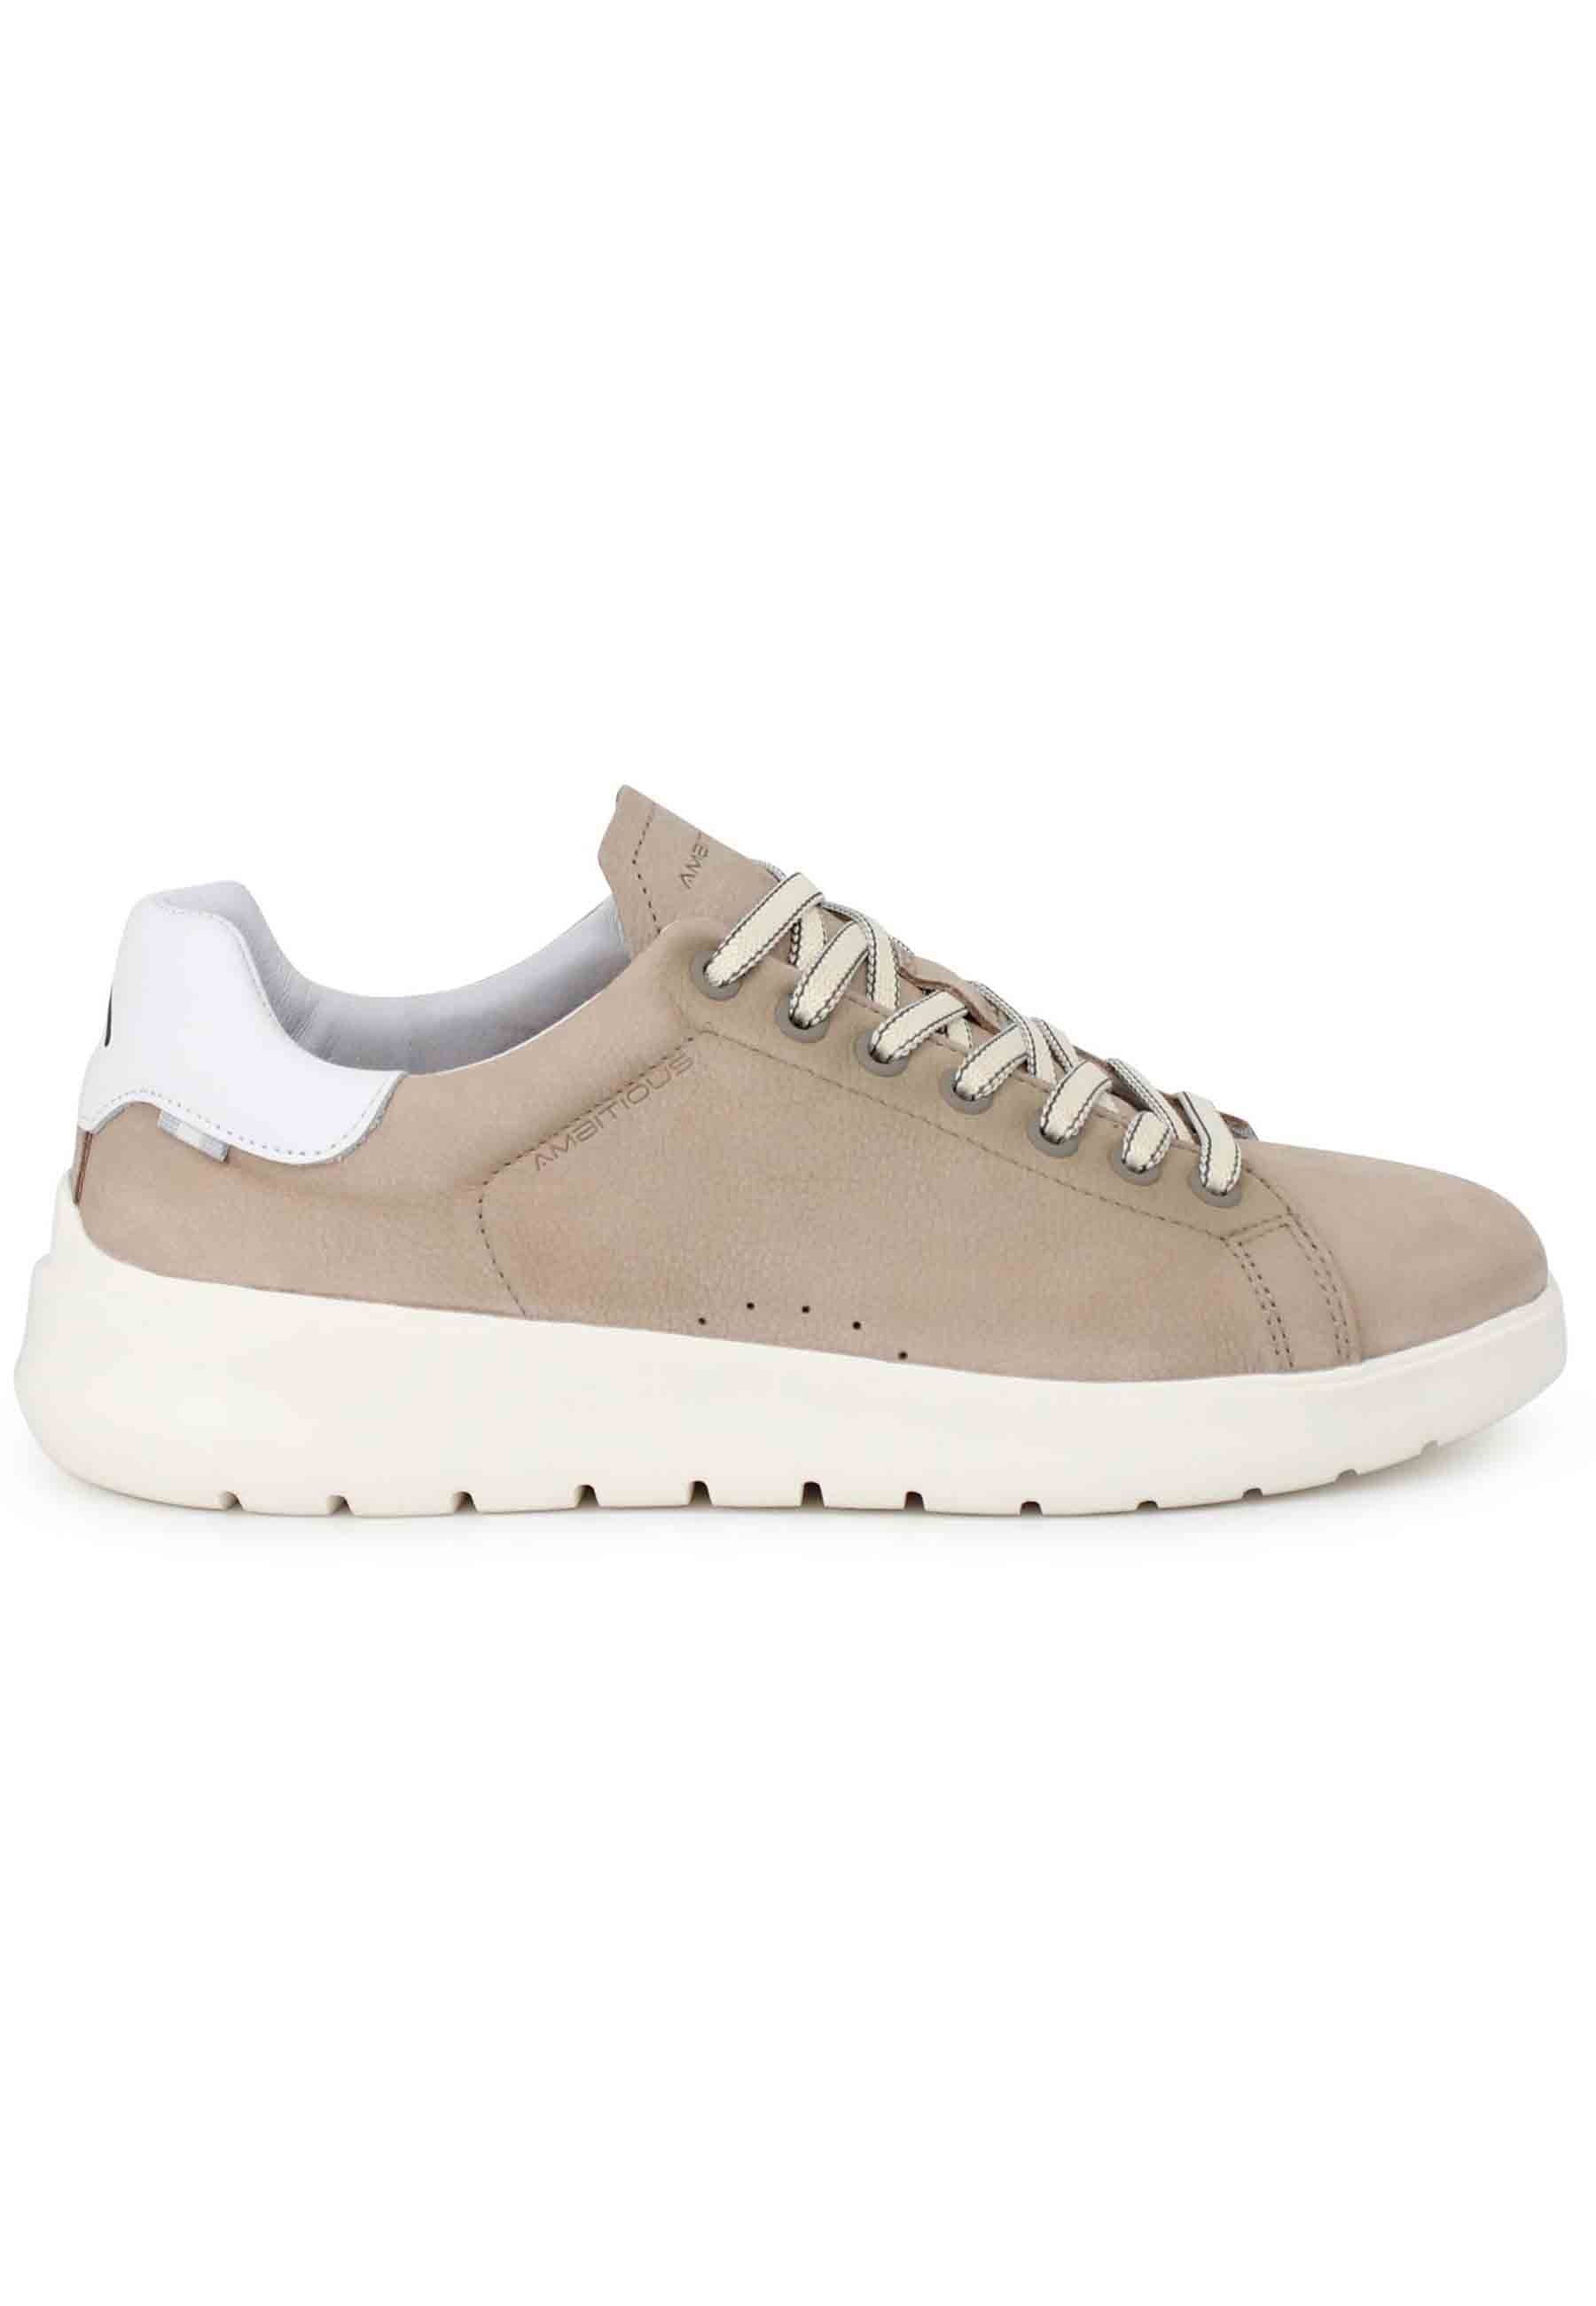 Hover men's sneakers in sand nubuck with high rubber sole